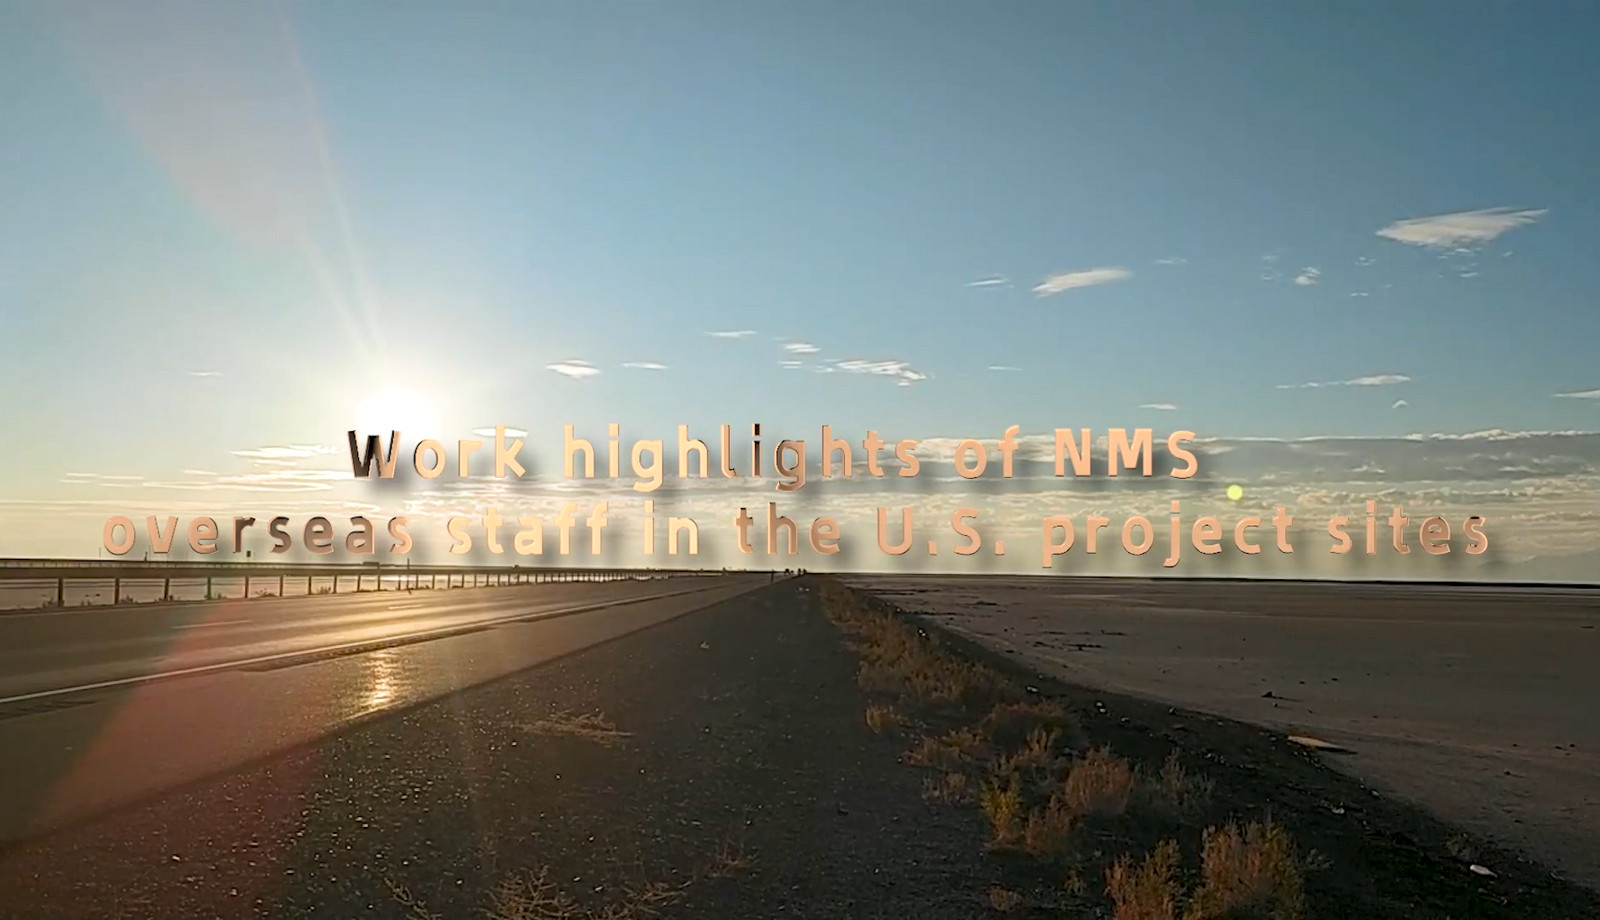 Work highlights of NMS overseas staff in the U.S. project sites